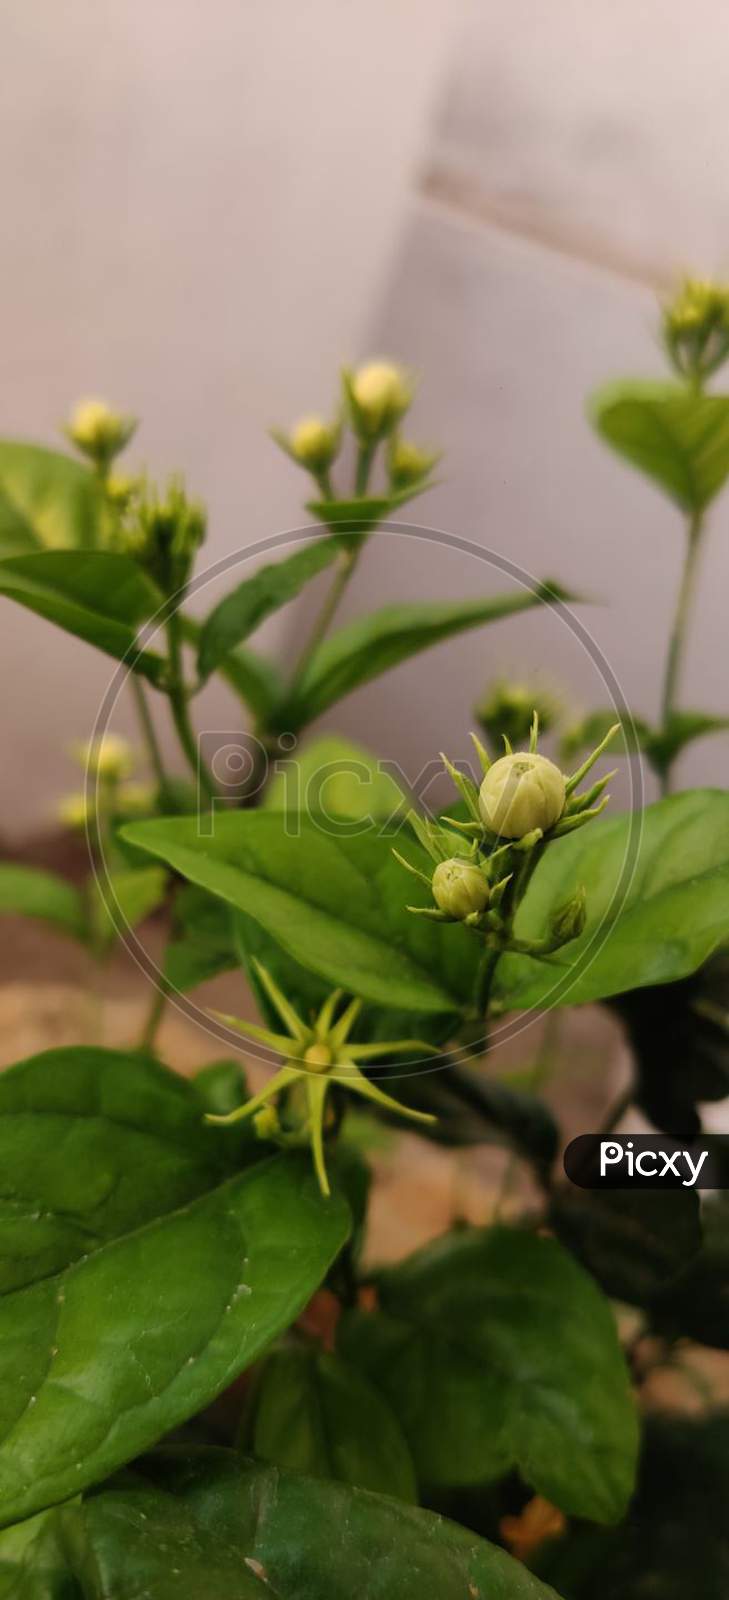 Flower Buds Within Green Leaves On Small Flower Plants